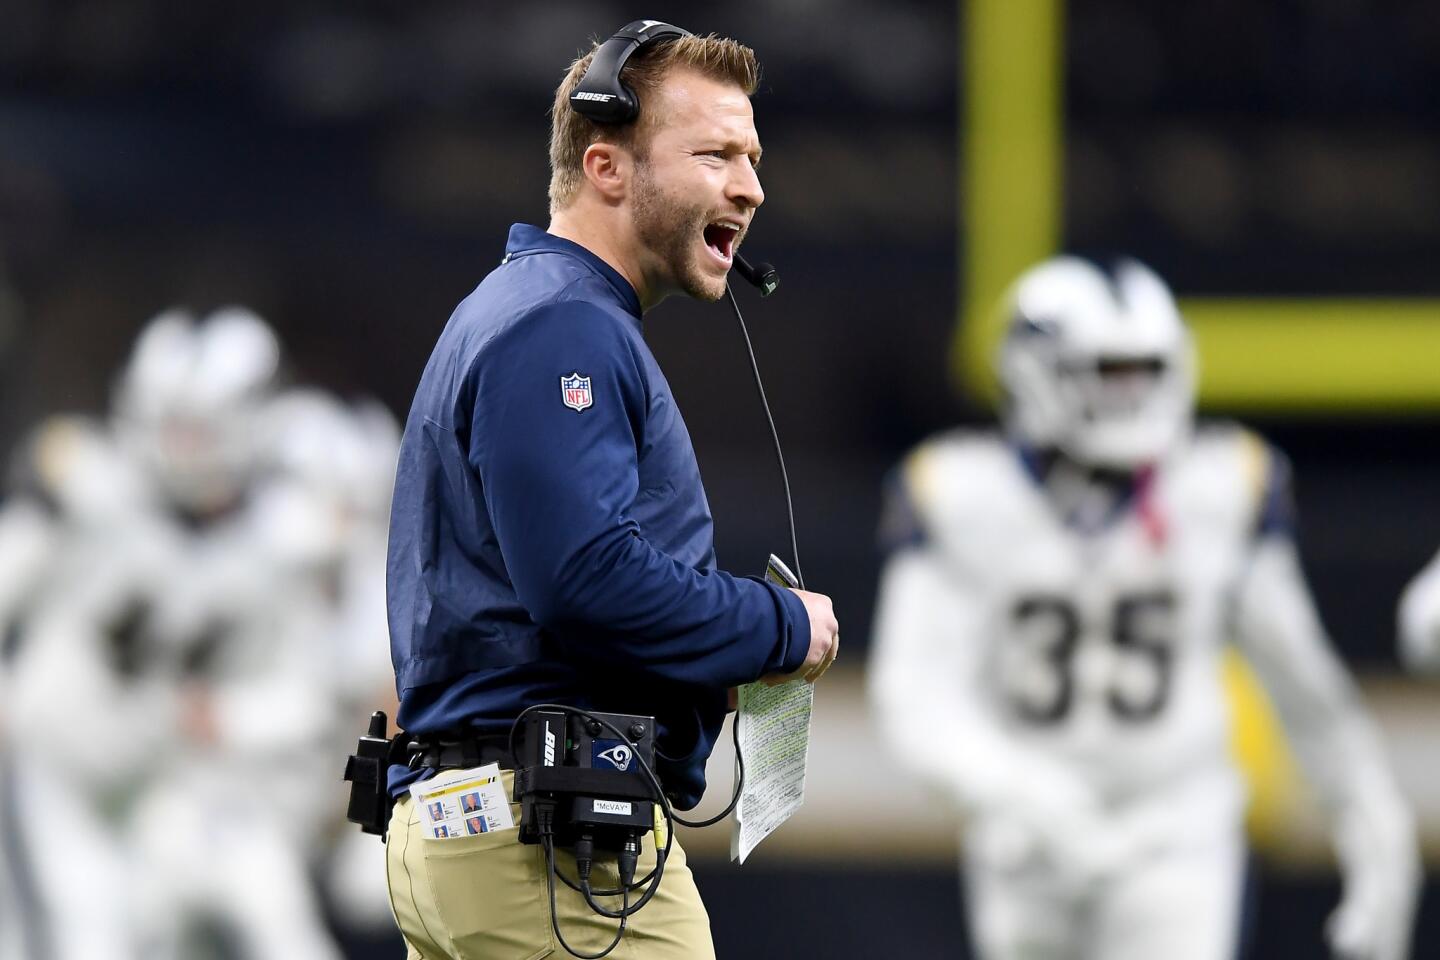 Rams head coach Sean McVay argues with a referee during a game against the New Orleans Saints in the NFC Championship at the Superdome in New Orleans Sunday.